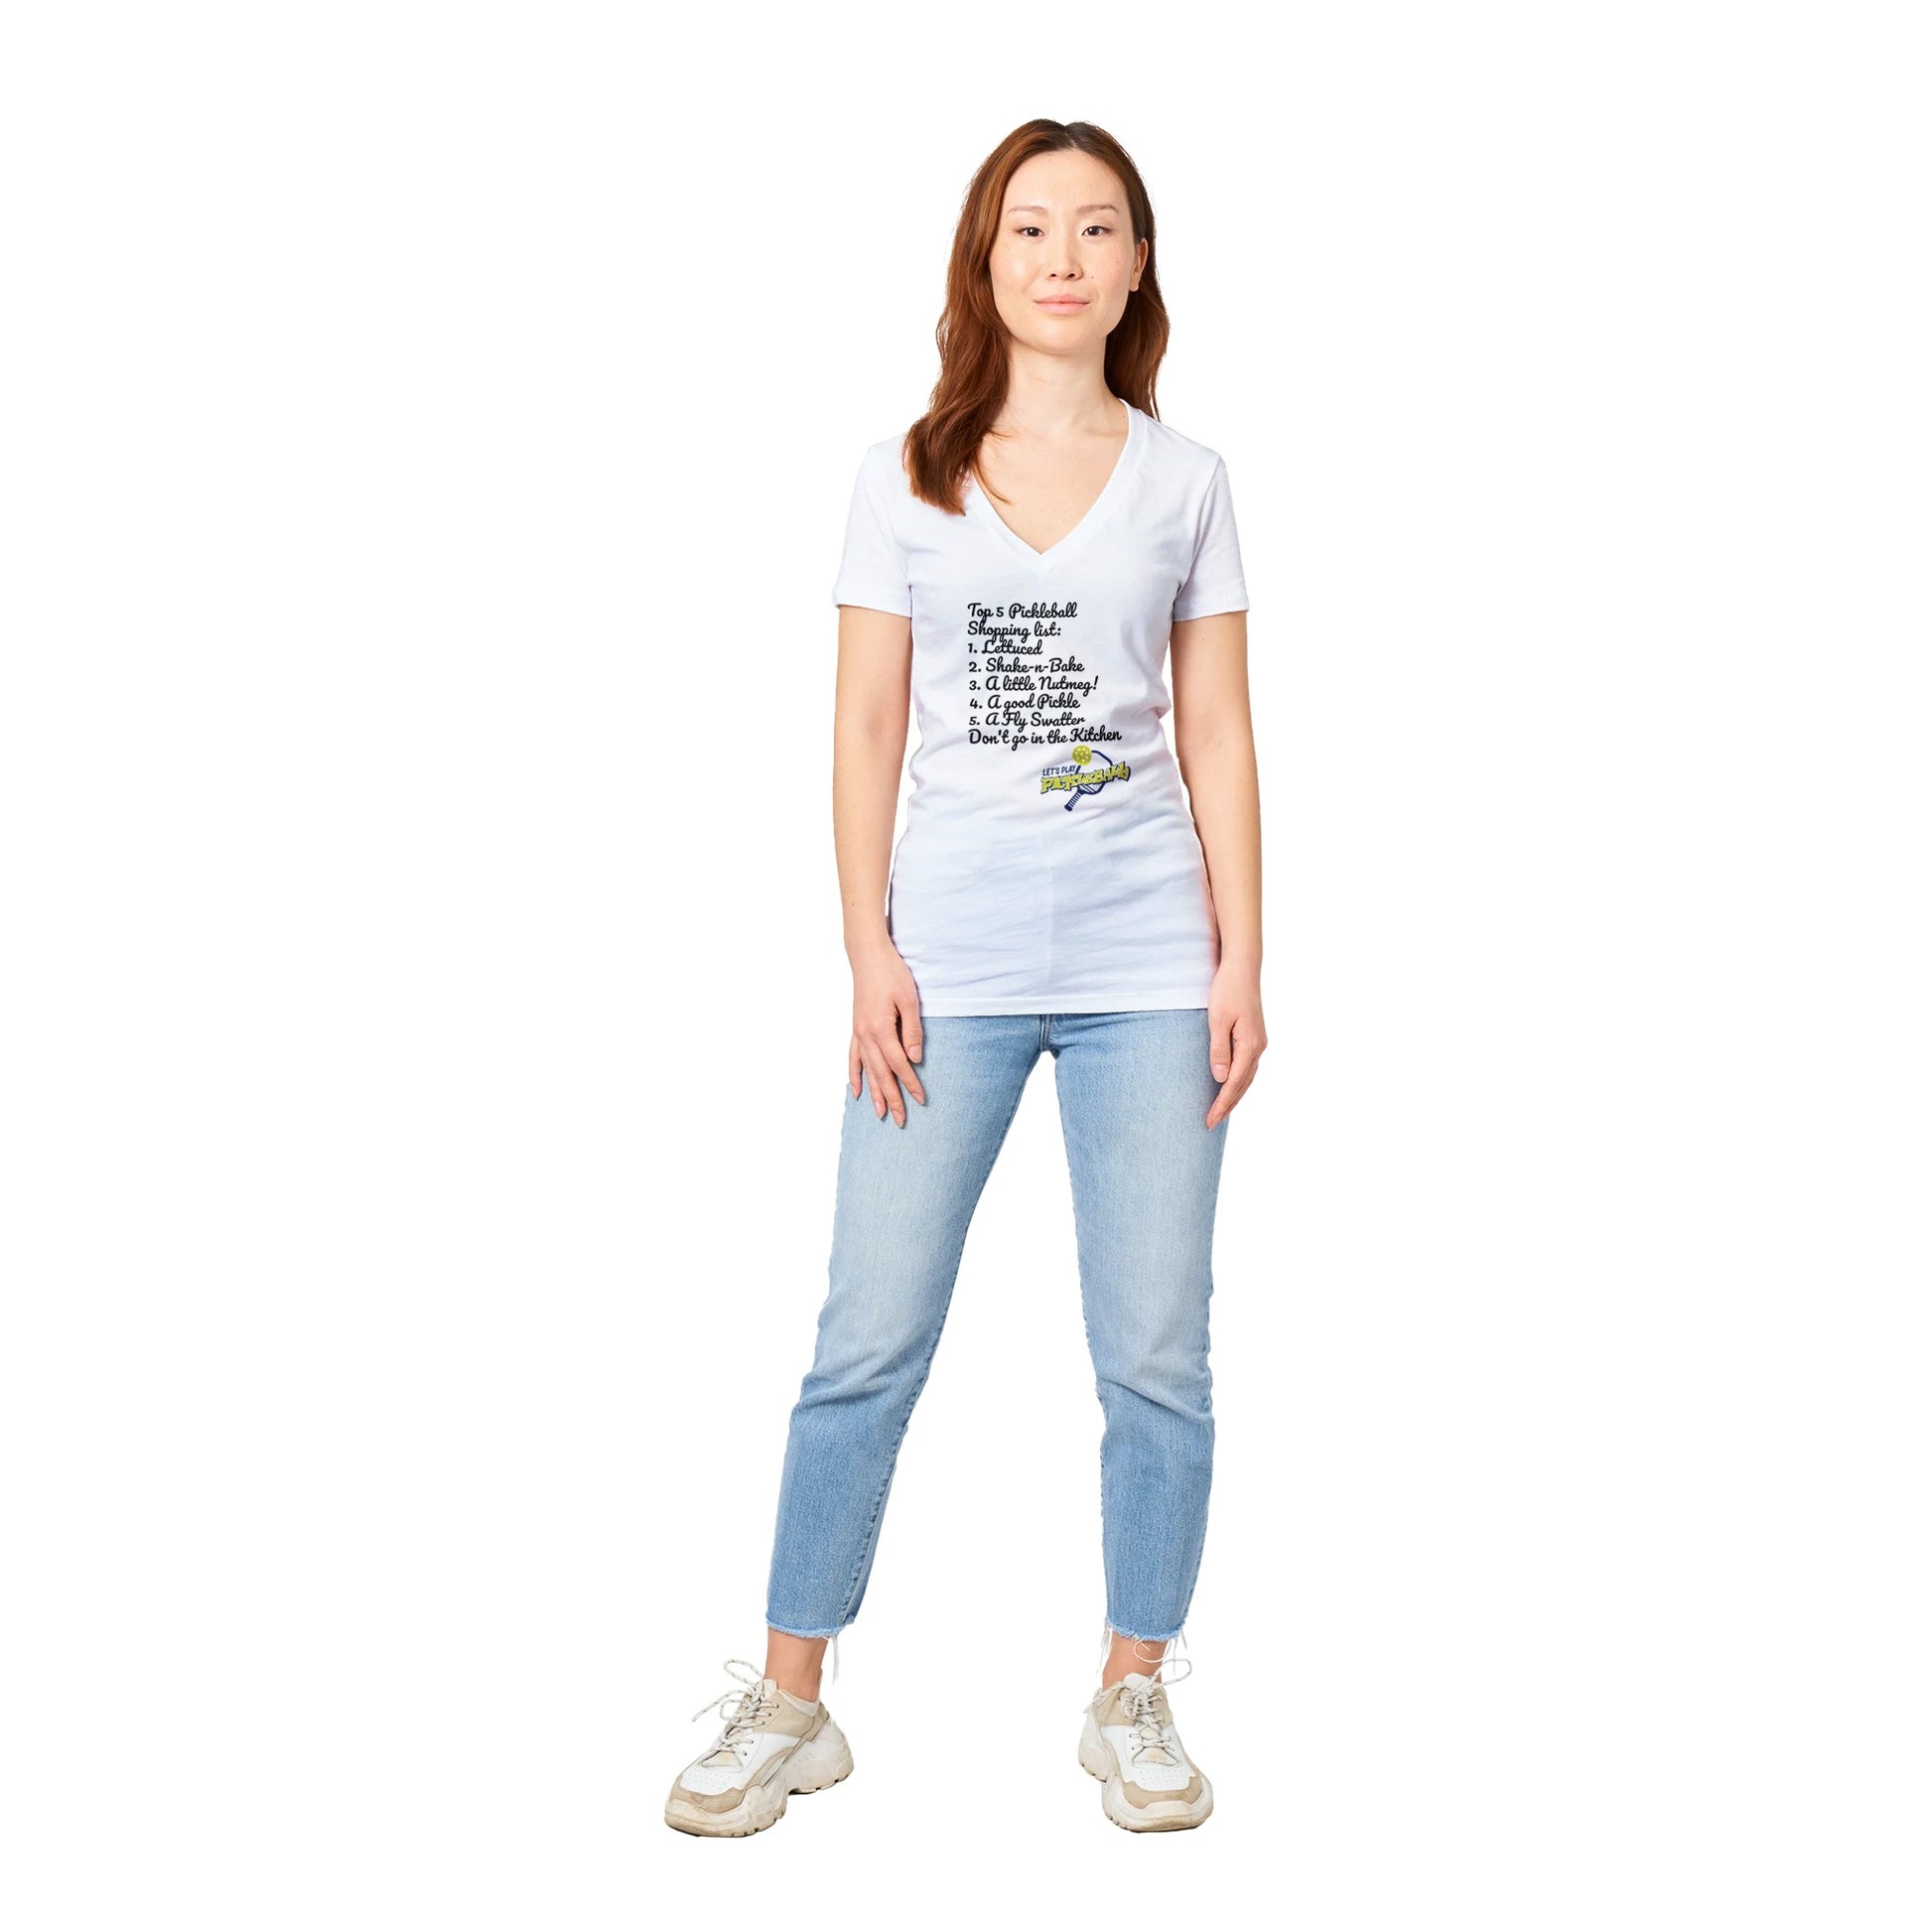 Asian Female model standing wearing original motto Top 5 PickleBall list premium women’s V-neck t-shirt from WhatYa Say Apparel looking forward.